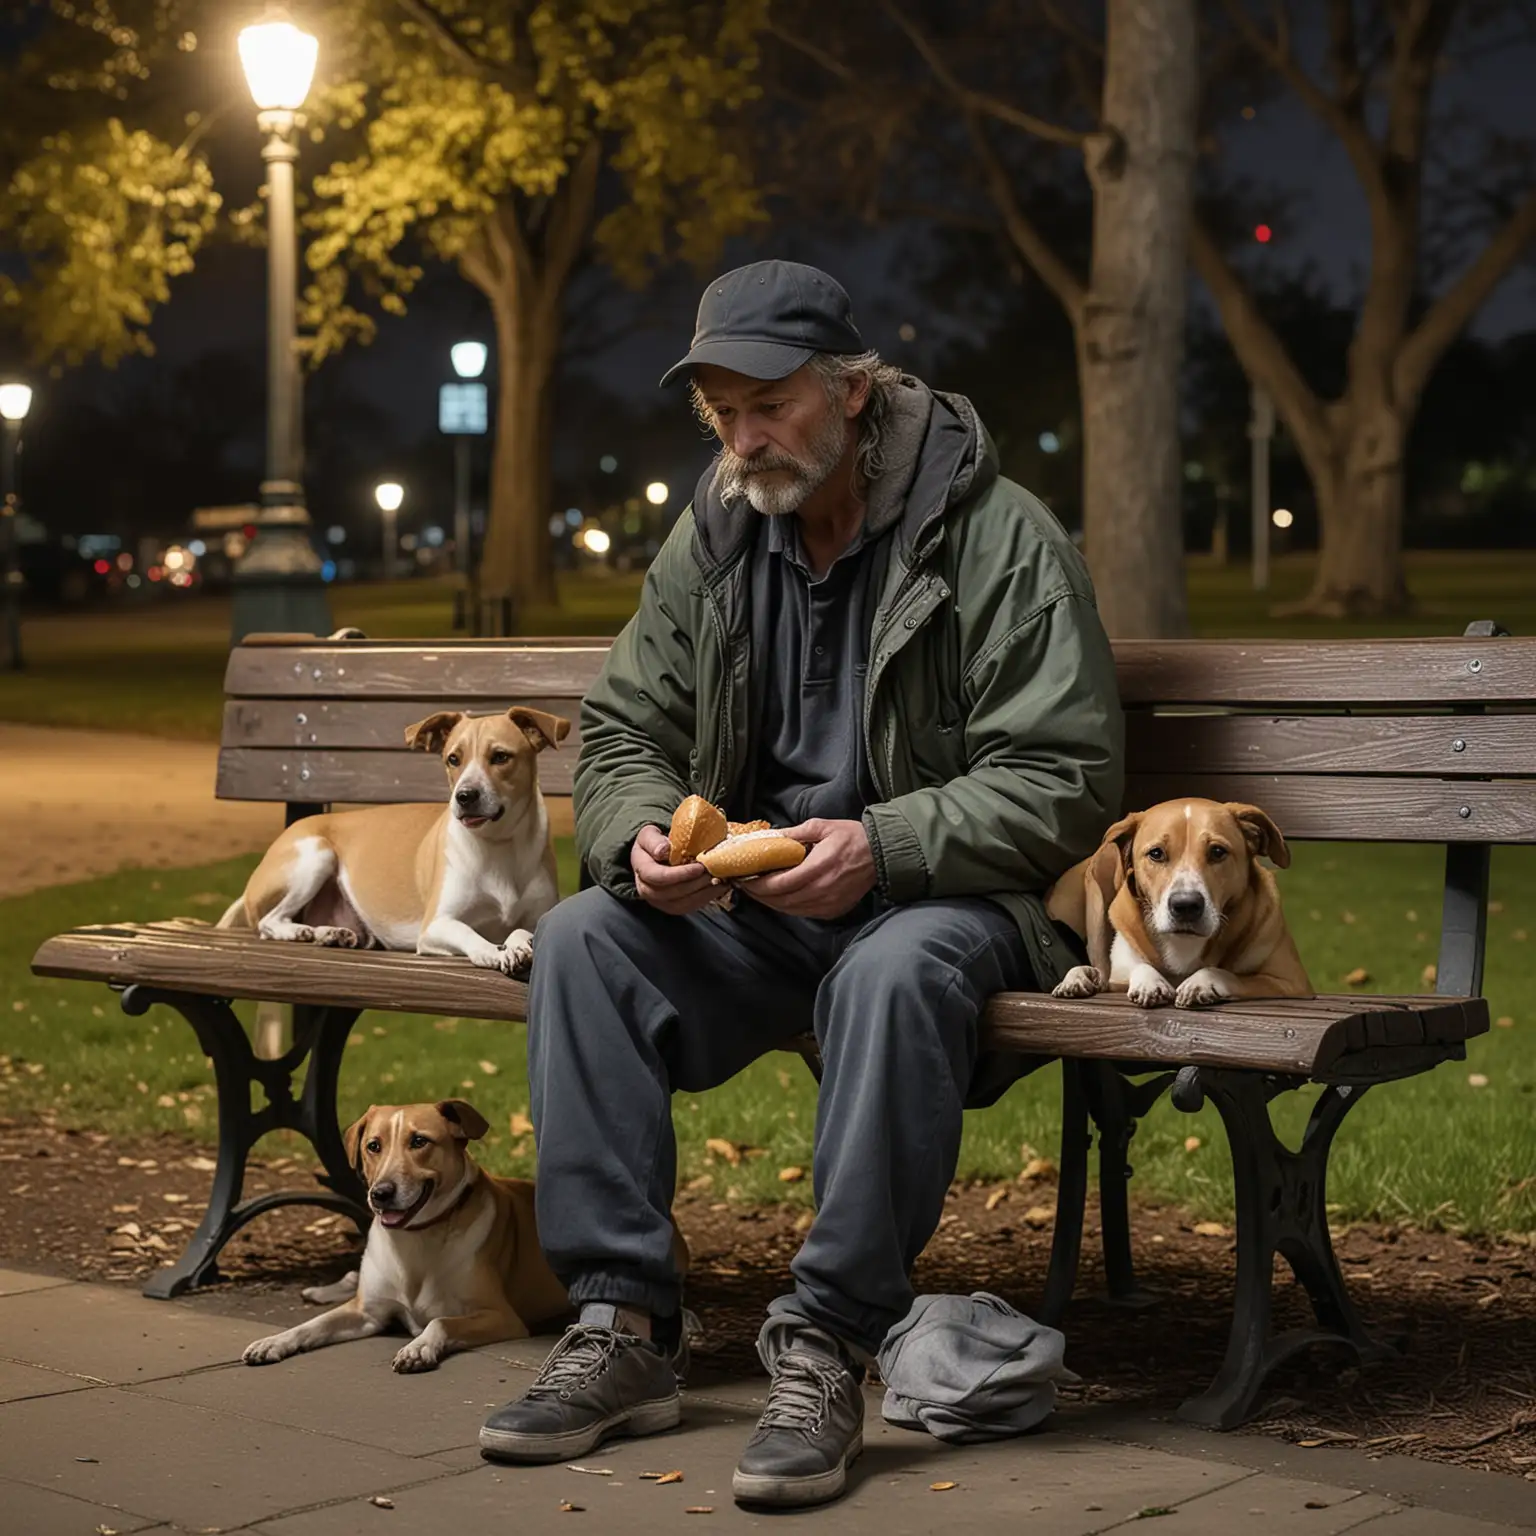 An image of a homeless person, sitting on a bench in a park, at night, feeding dogs, rough clothing, baseball cap, middle aged, realistic